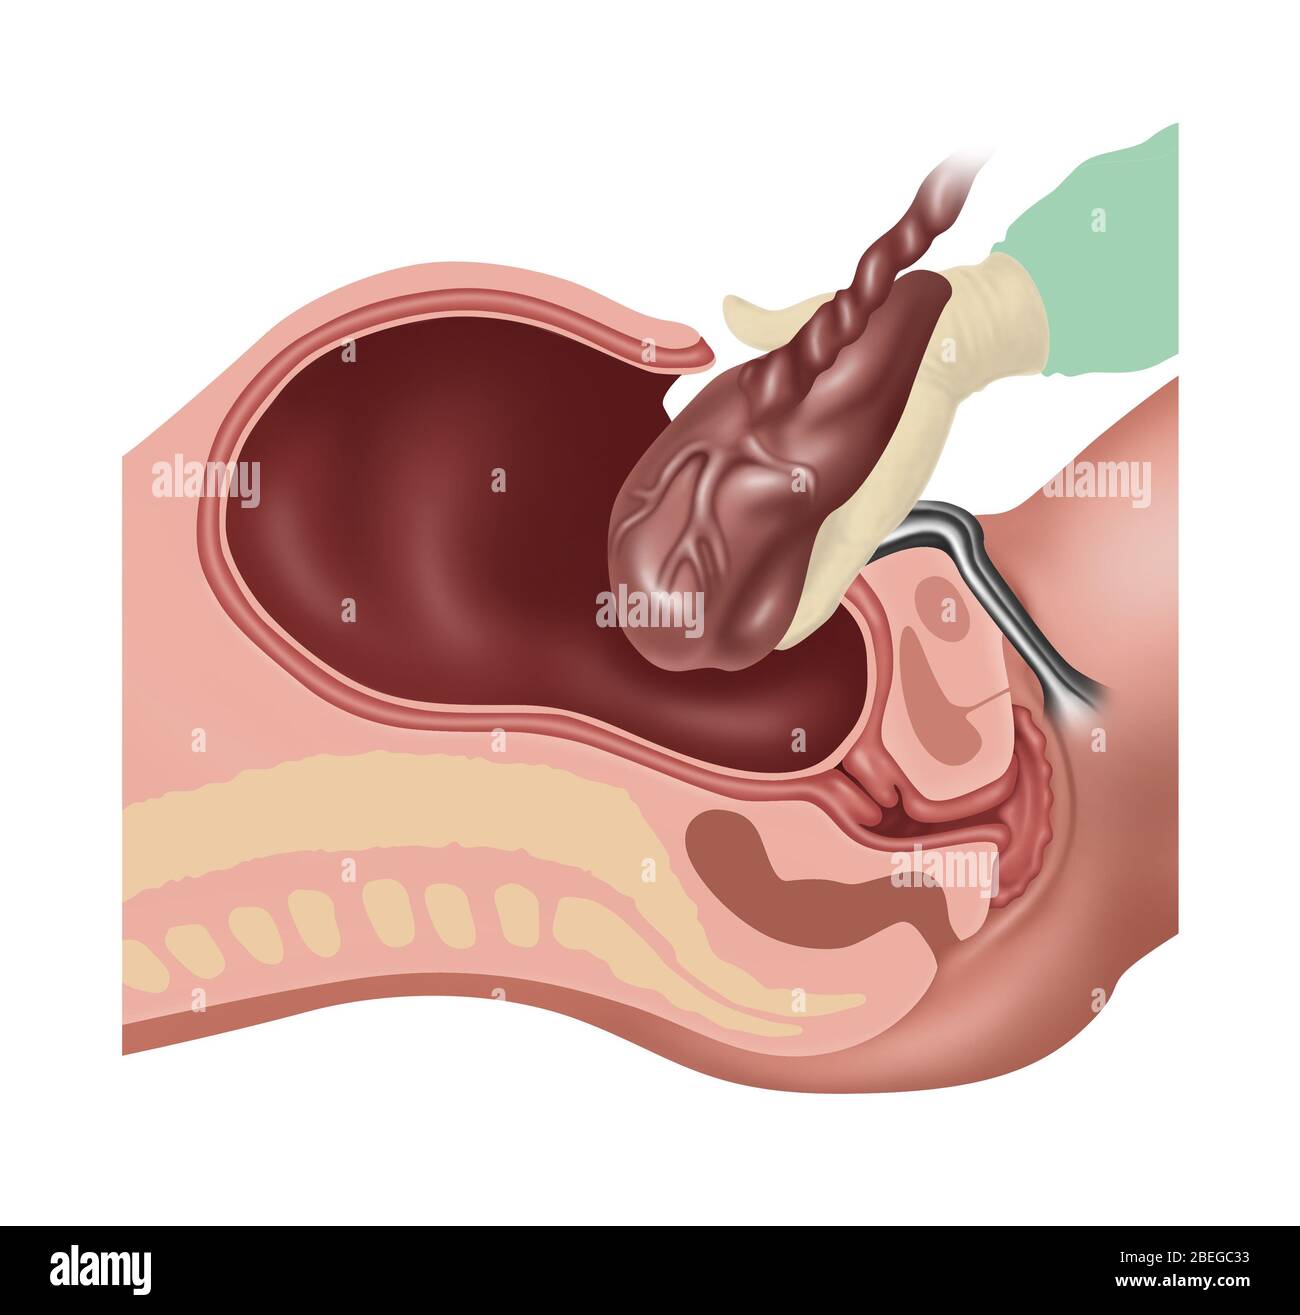 Cesarean Section Steps, Illustration, 3 of 4 Stock Photo